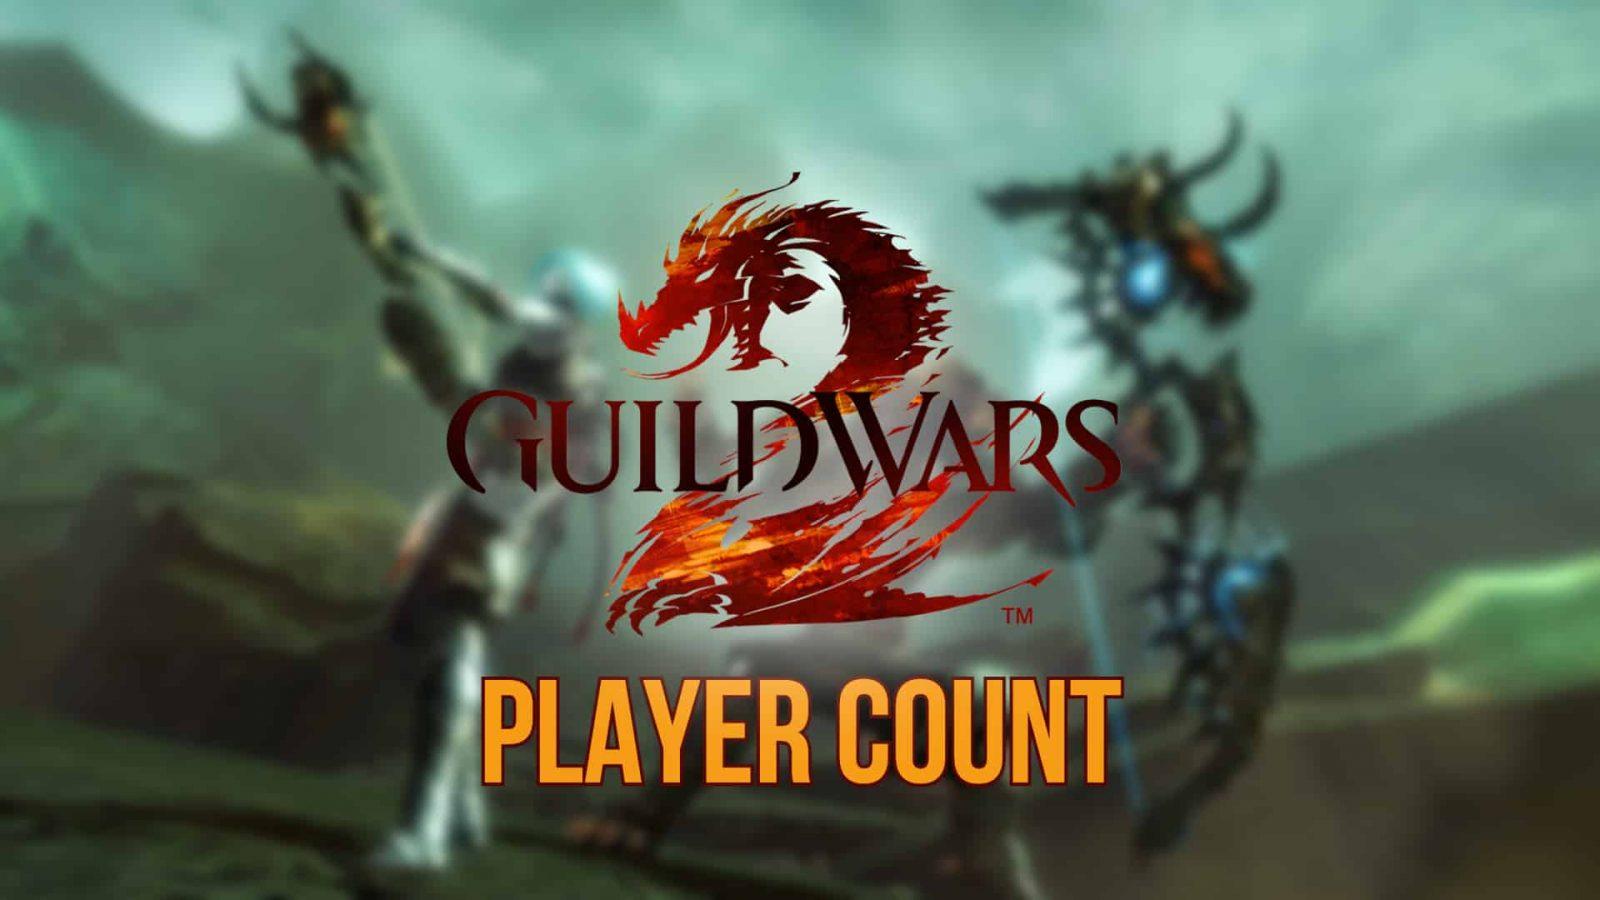 World of Warcraft Player Count - How Many People Are Playing?